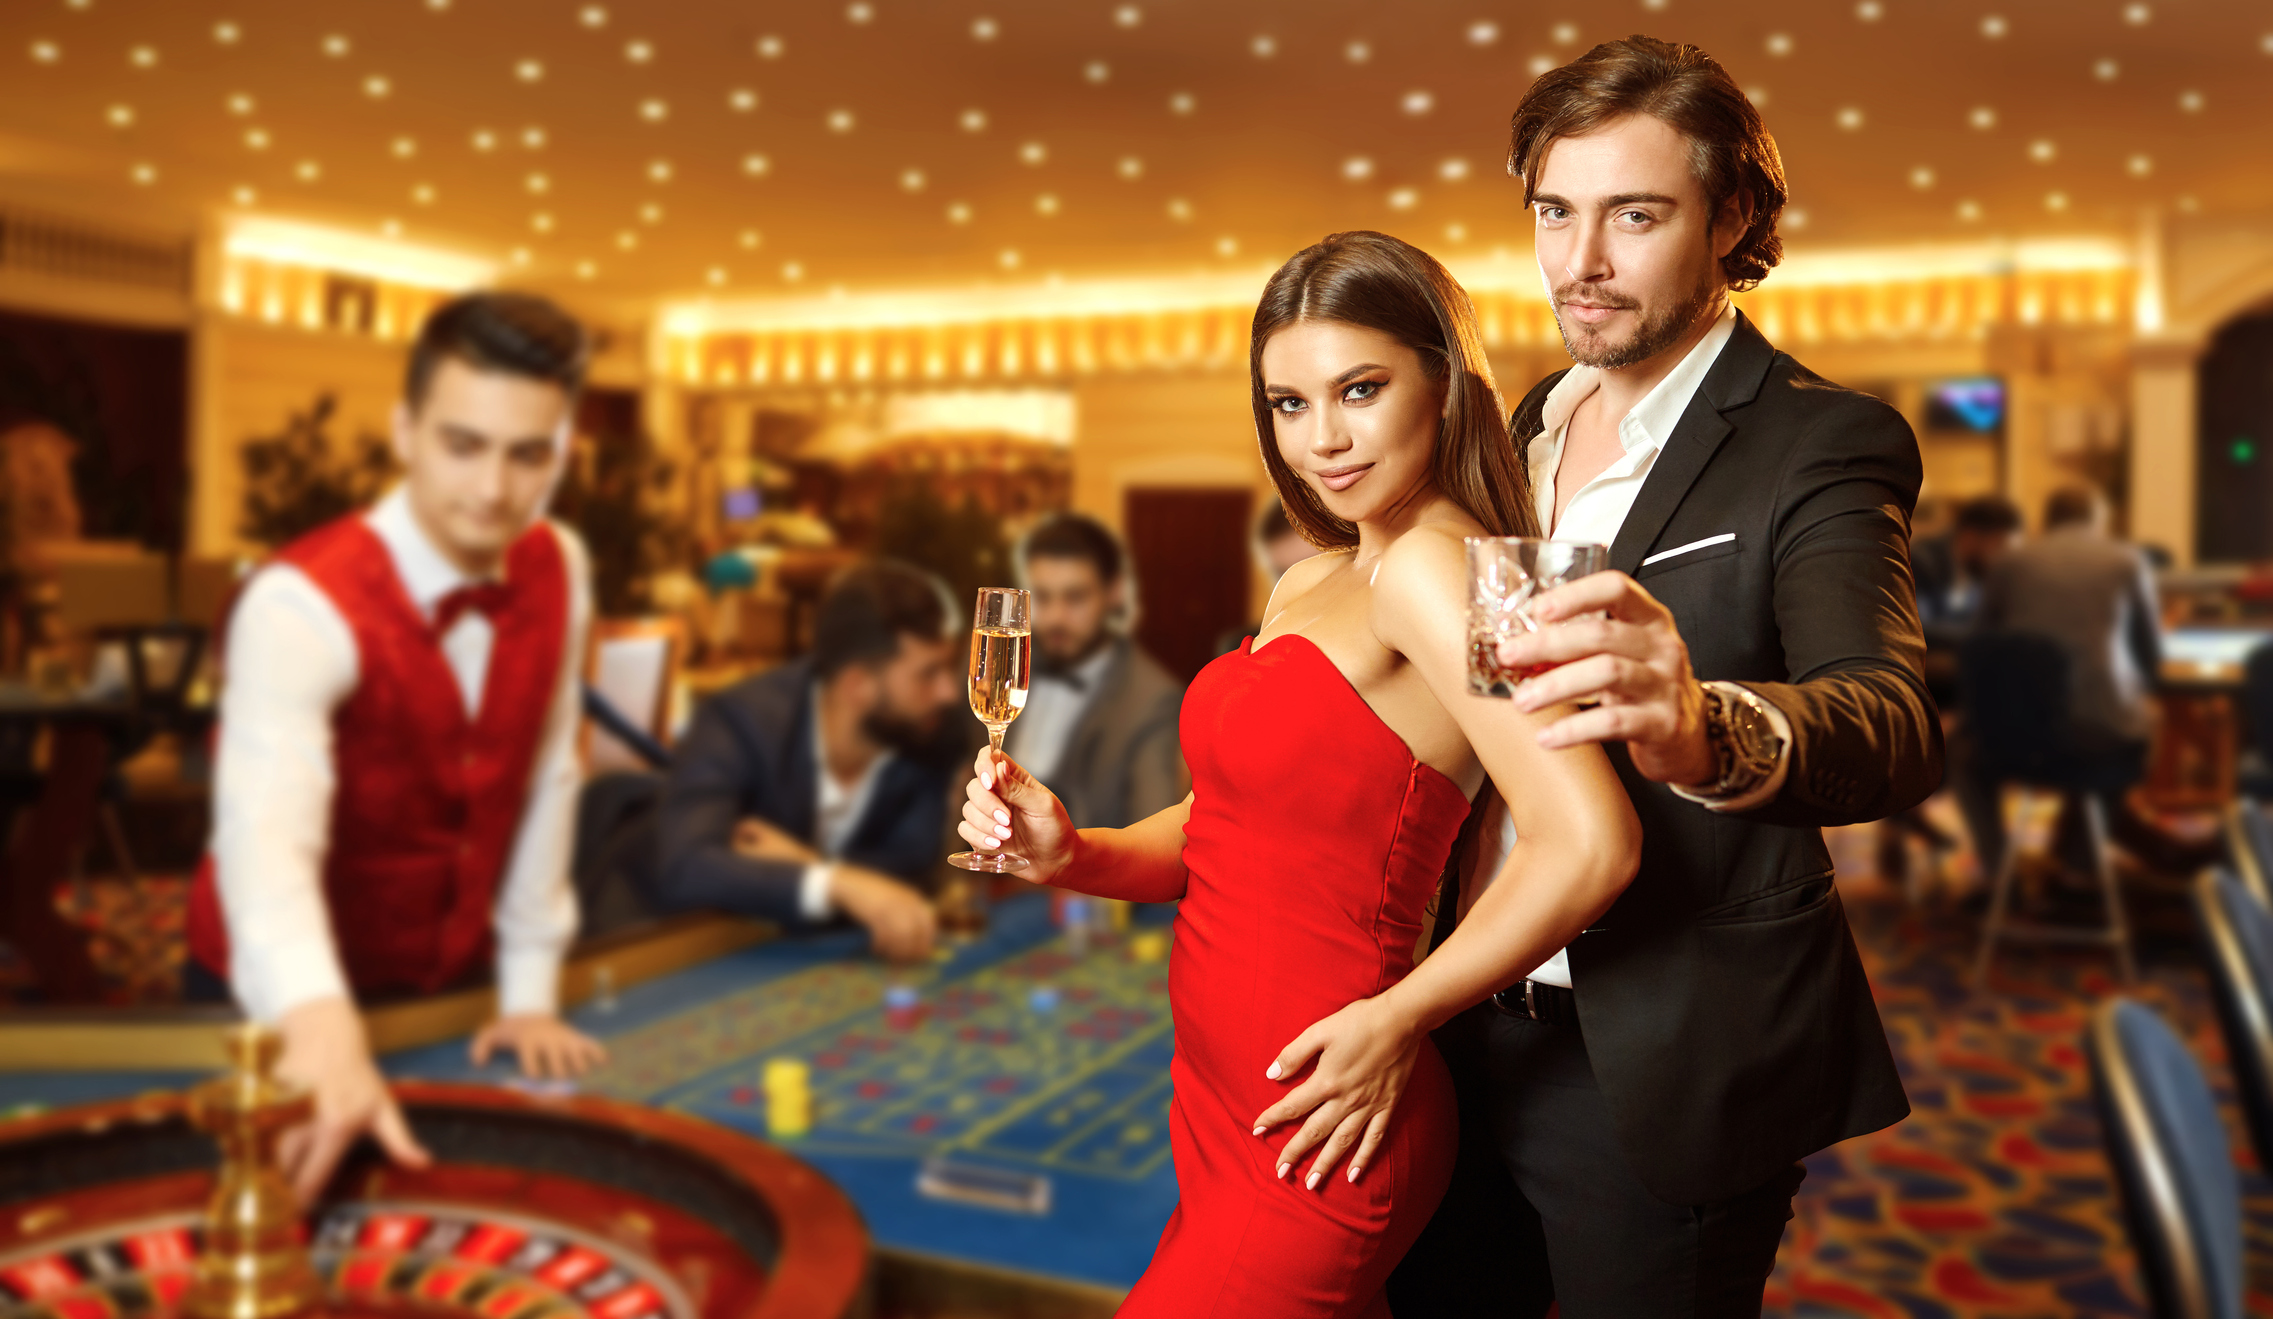 Casino Night Decorations - Party Ideas for Real People